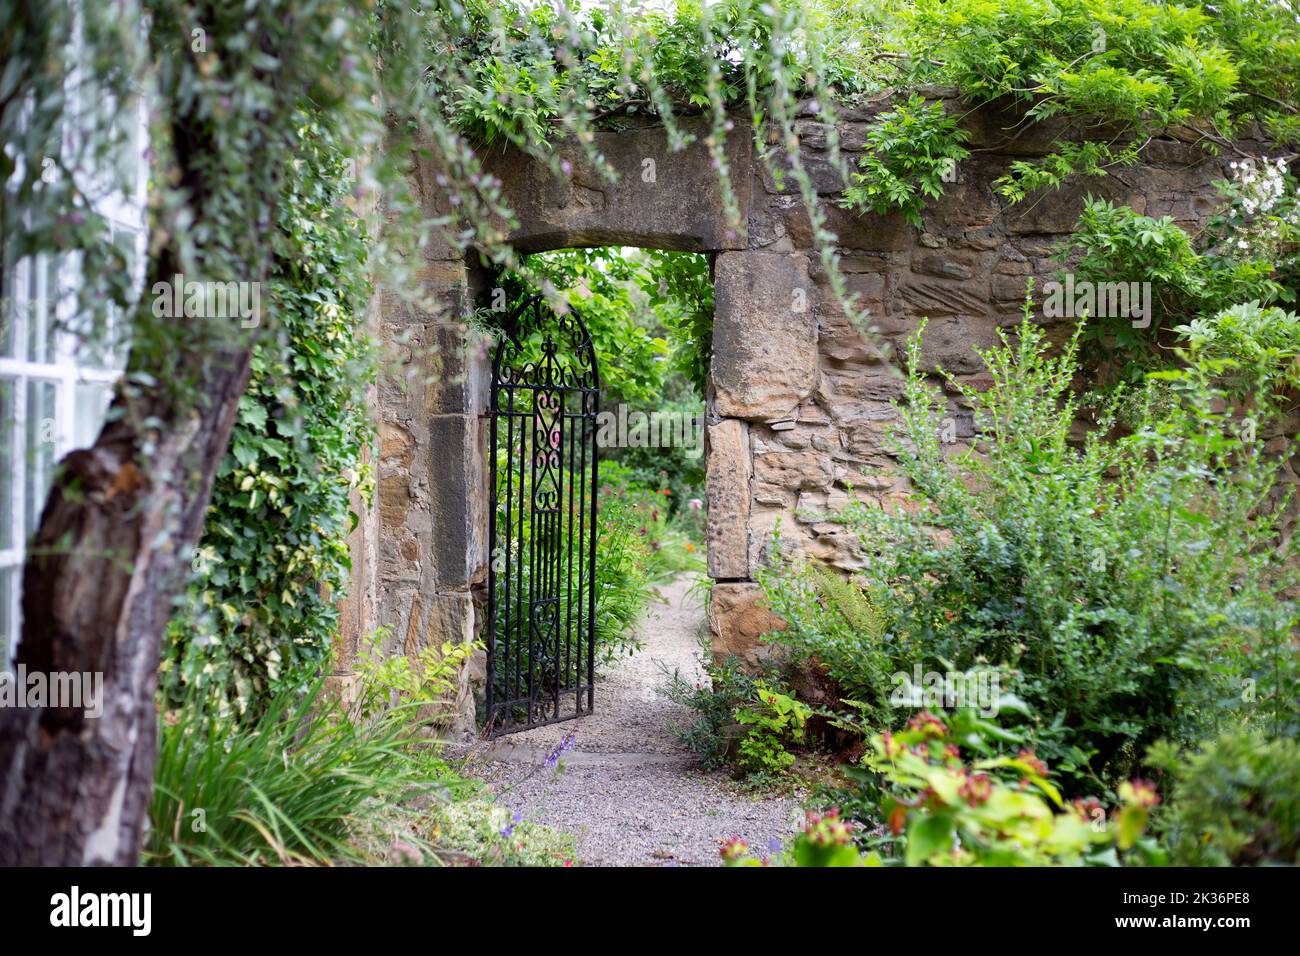 Crook Hall and Gardens in County Durham.Crook Hall and Gardens closed in 2020 and the former owners approached the National Trust for support in secur Stock Photo